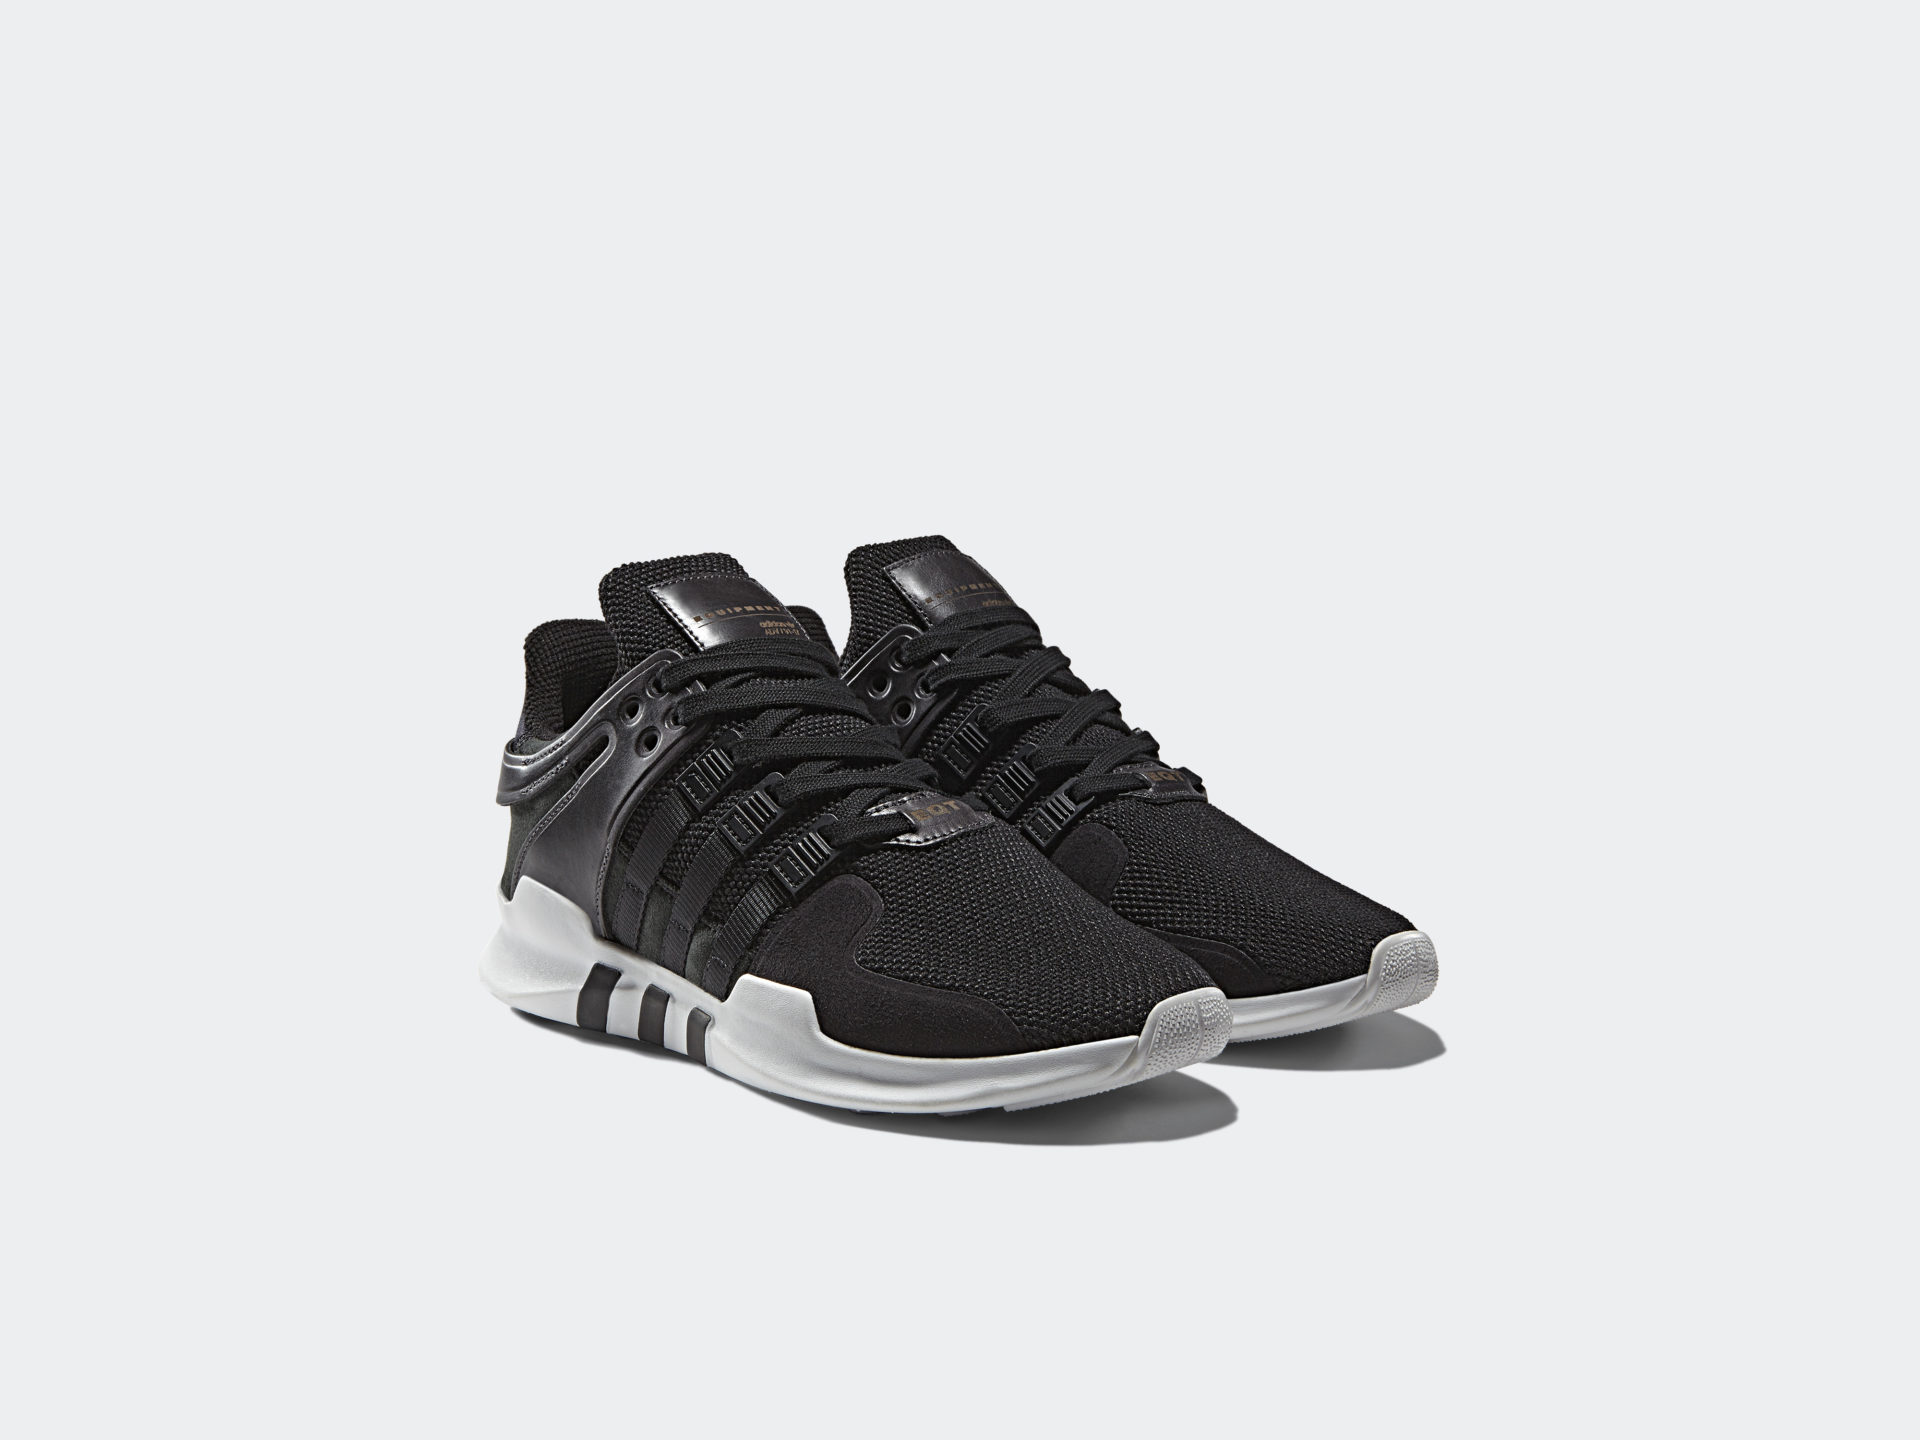 adidas EQT Support ADV "Milled Leather"